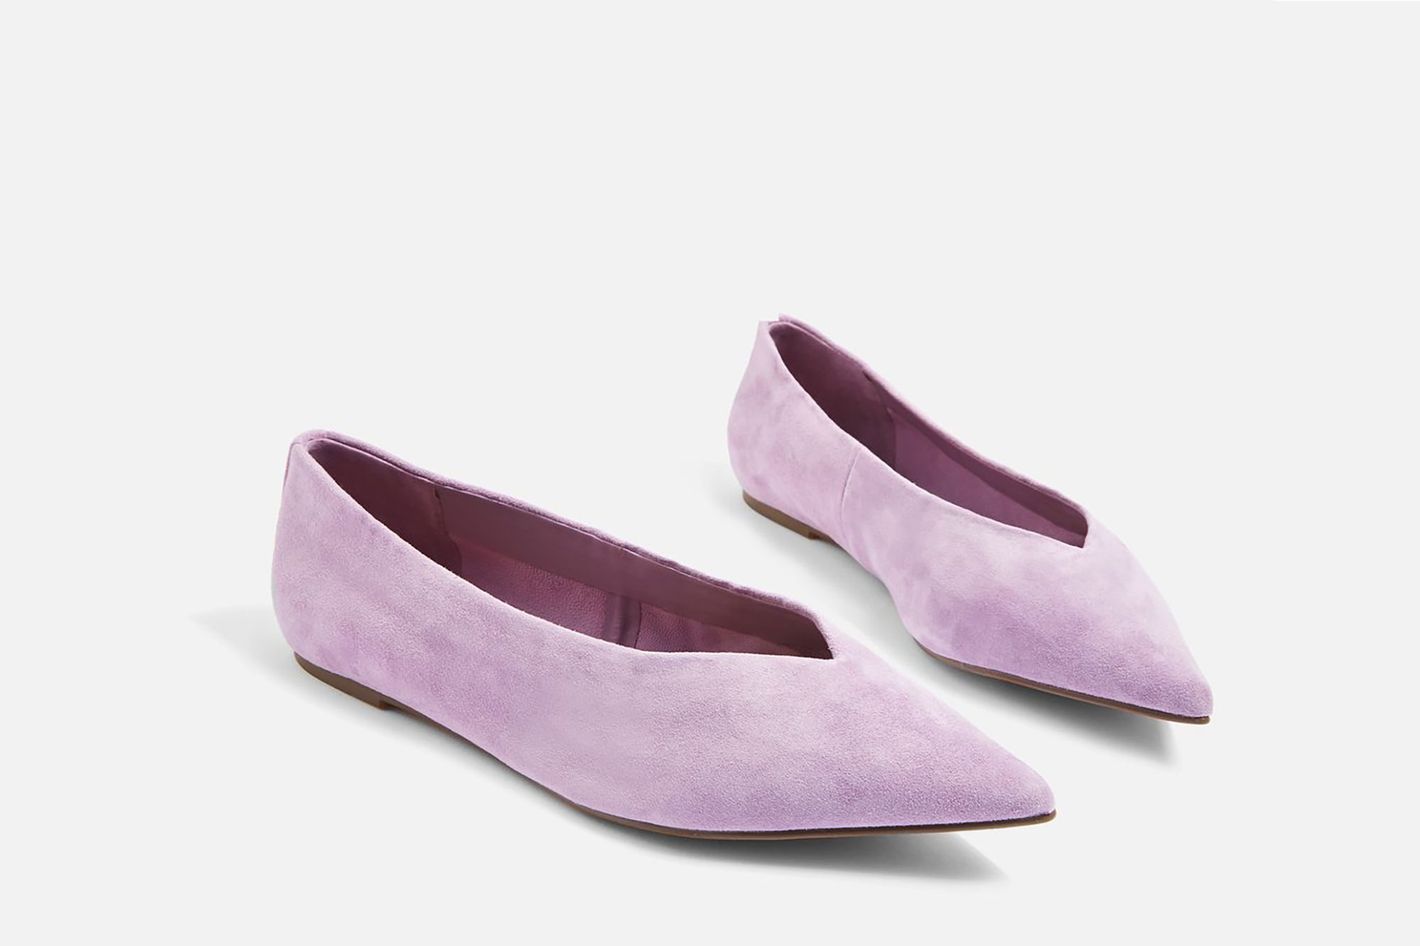 The Best Melodramatic Purple Pieces to Shop for Spring